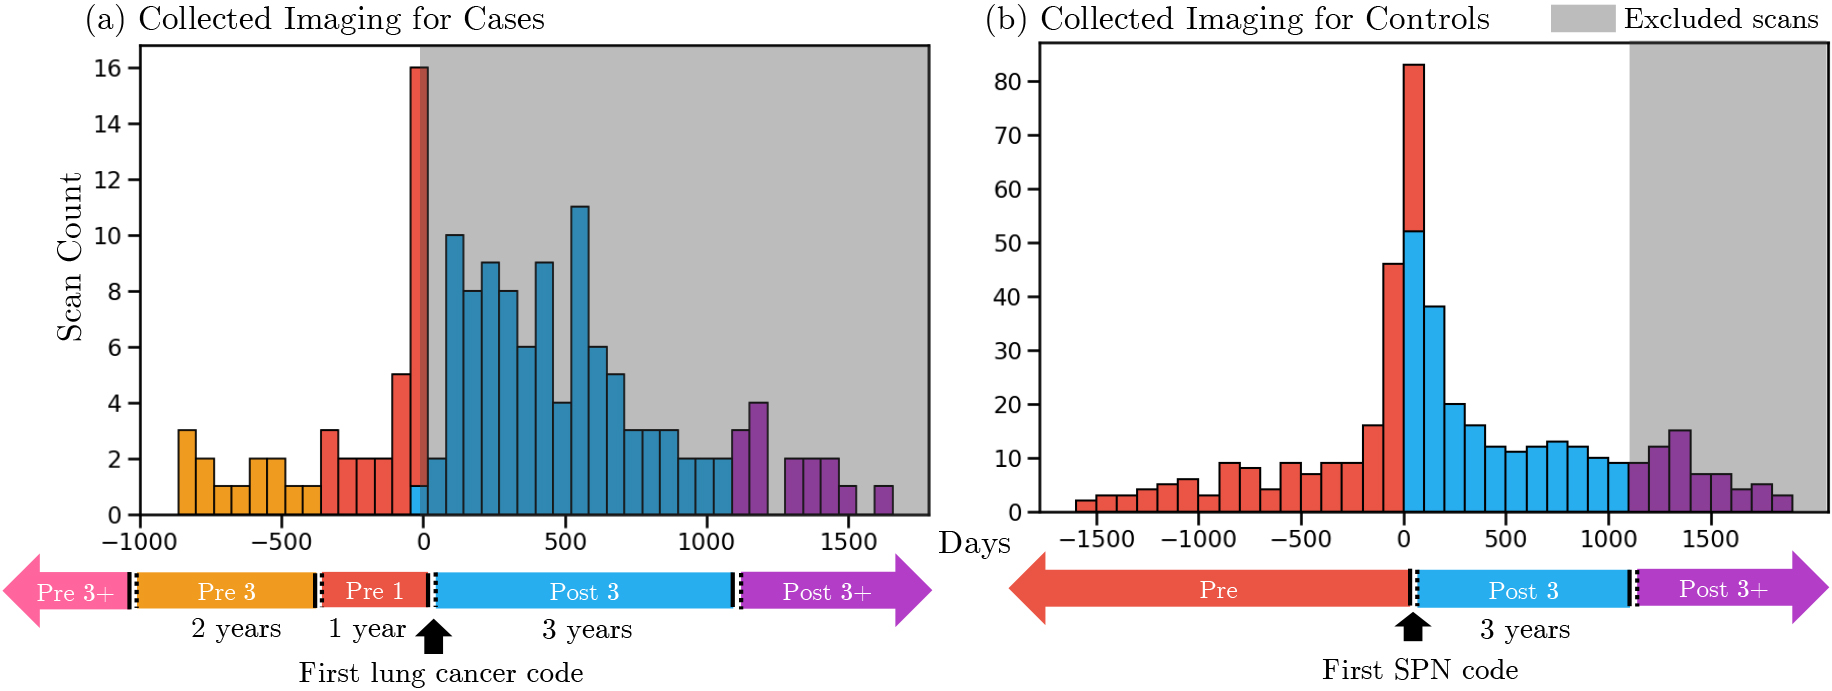 Distribution of collected imaging surrounding first diagnosis of lung cancer in cases and the first observation of a pulmonary nodule in controls. Scans were classified into disjoint time windows (in chronological order: Pre 3+, Pre 3, Pre 1, Post 3, and Post 3+) based on their proximity to the first lung cancer event for cases or first SPN event for controls. For cases (a), scans occurring at or before the lung cancer event (Pre 3+, Pre 3, Pre 1) were included in the cohort while scans collected after were excluded (Post 3, Post 3+). For controls (b), scans that were acquired before or within three years after the first SPN code (Pre, Post 3) were included in the cohort while scans acquired three years after were excluded (Post 3+).